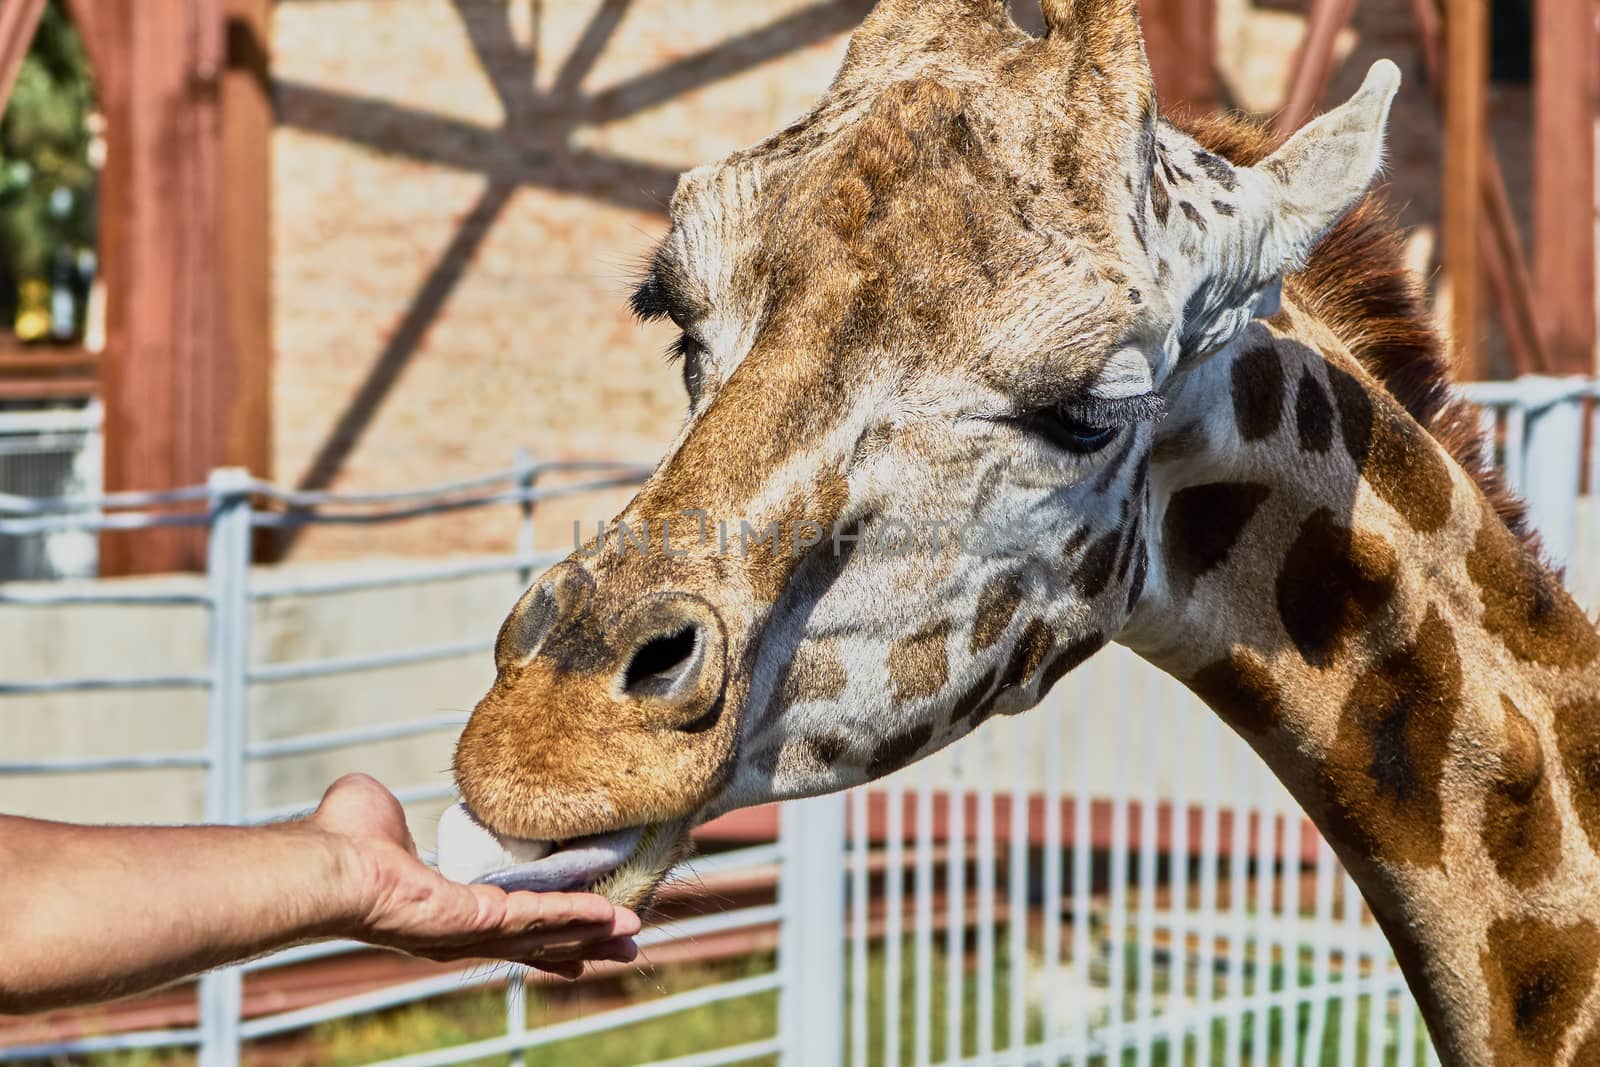 Giraffe at the zoo takes food from people                                                              